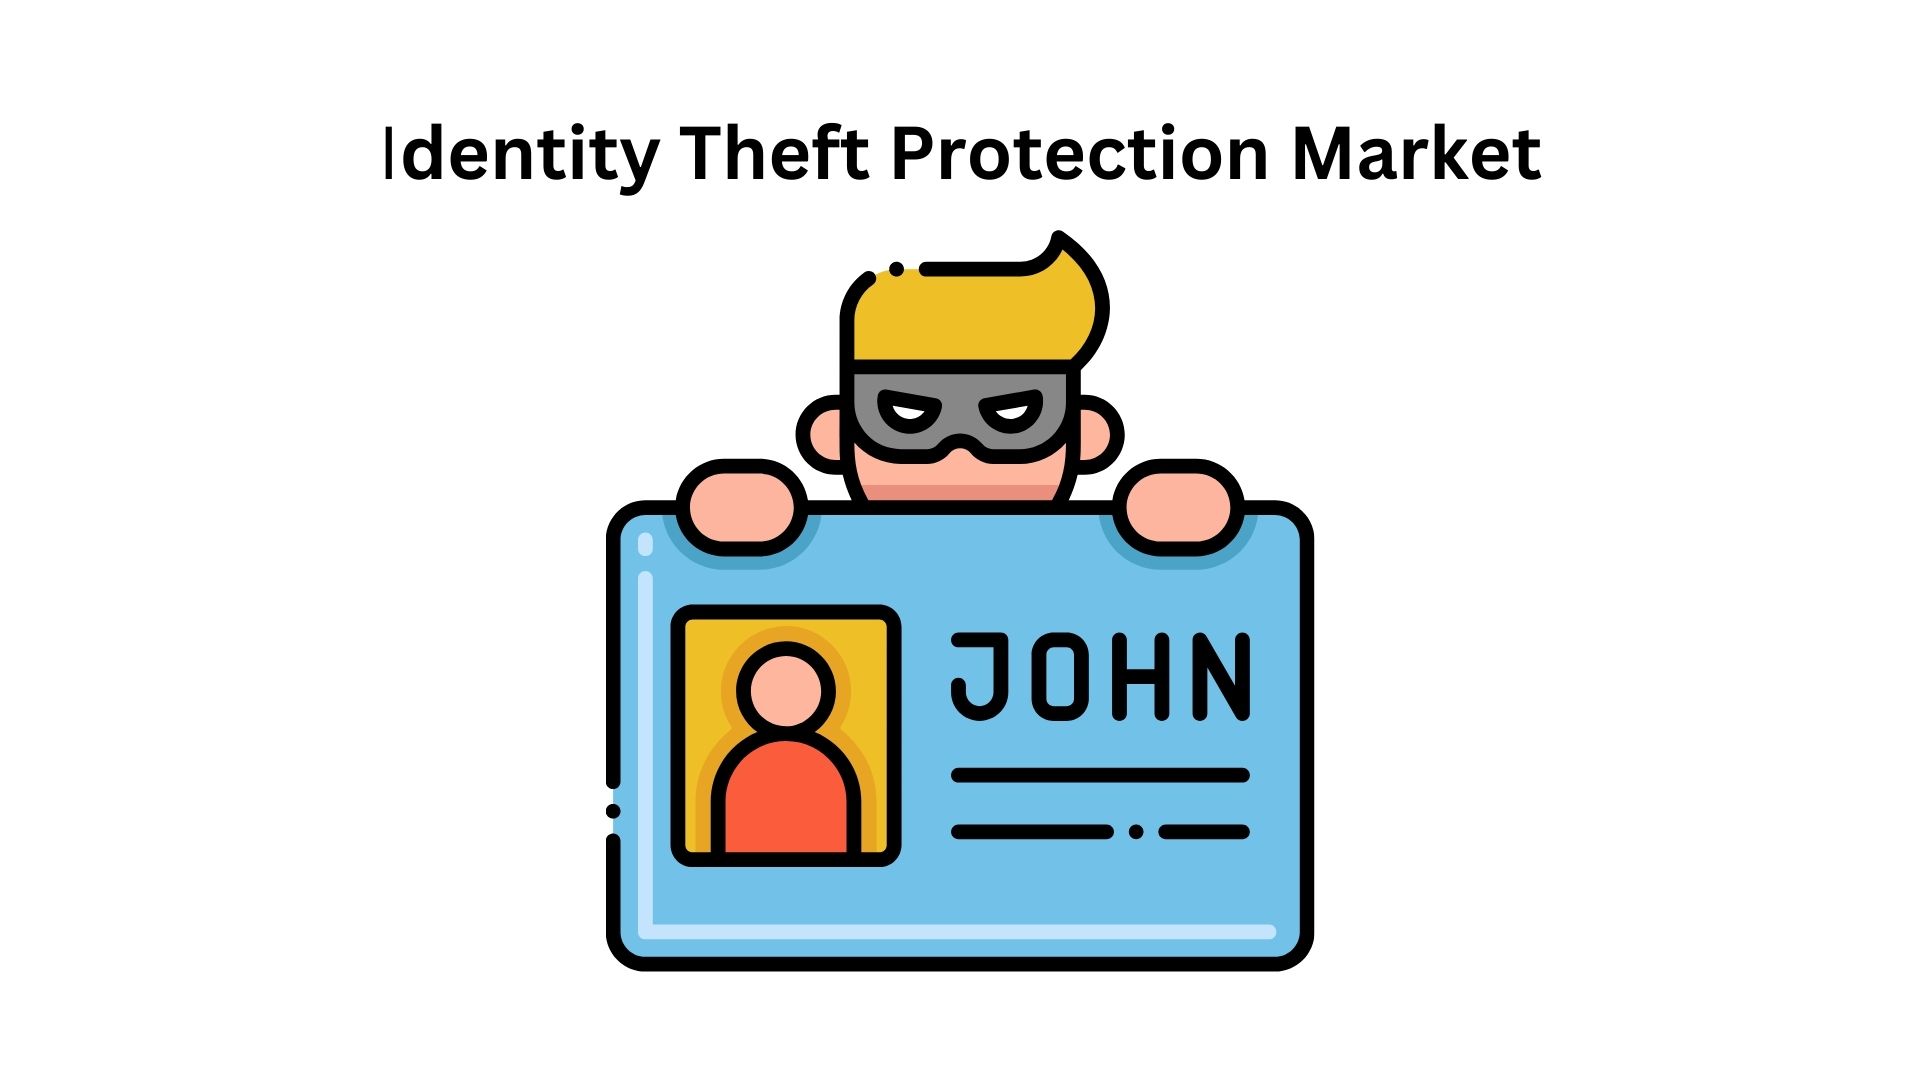 Global Identity Theft Protection Services Market is expected to reach USD 48.99 Bn by 2033